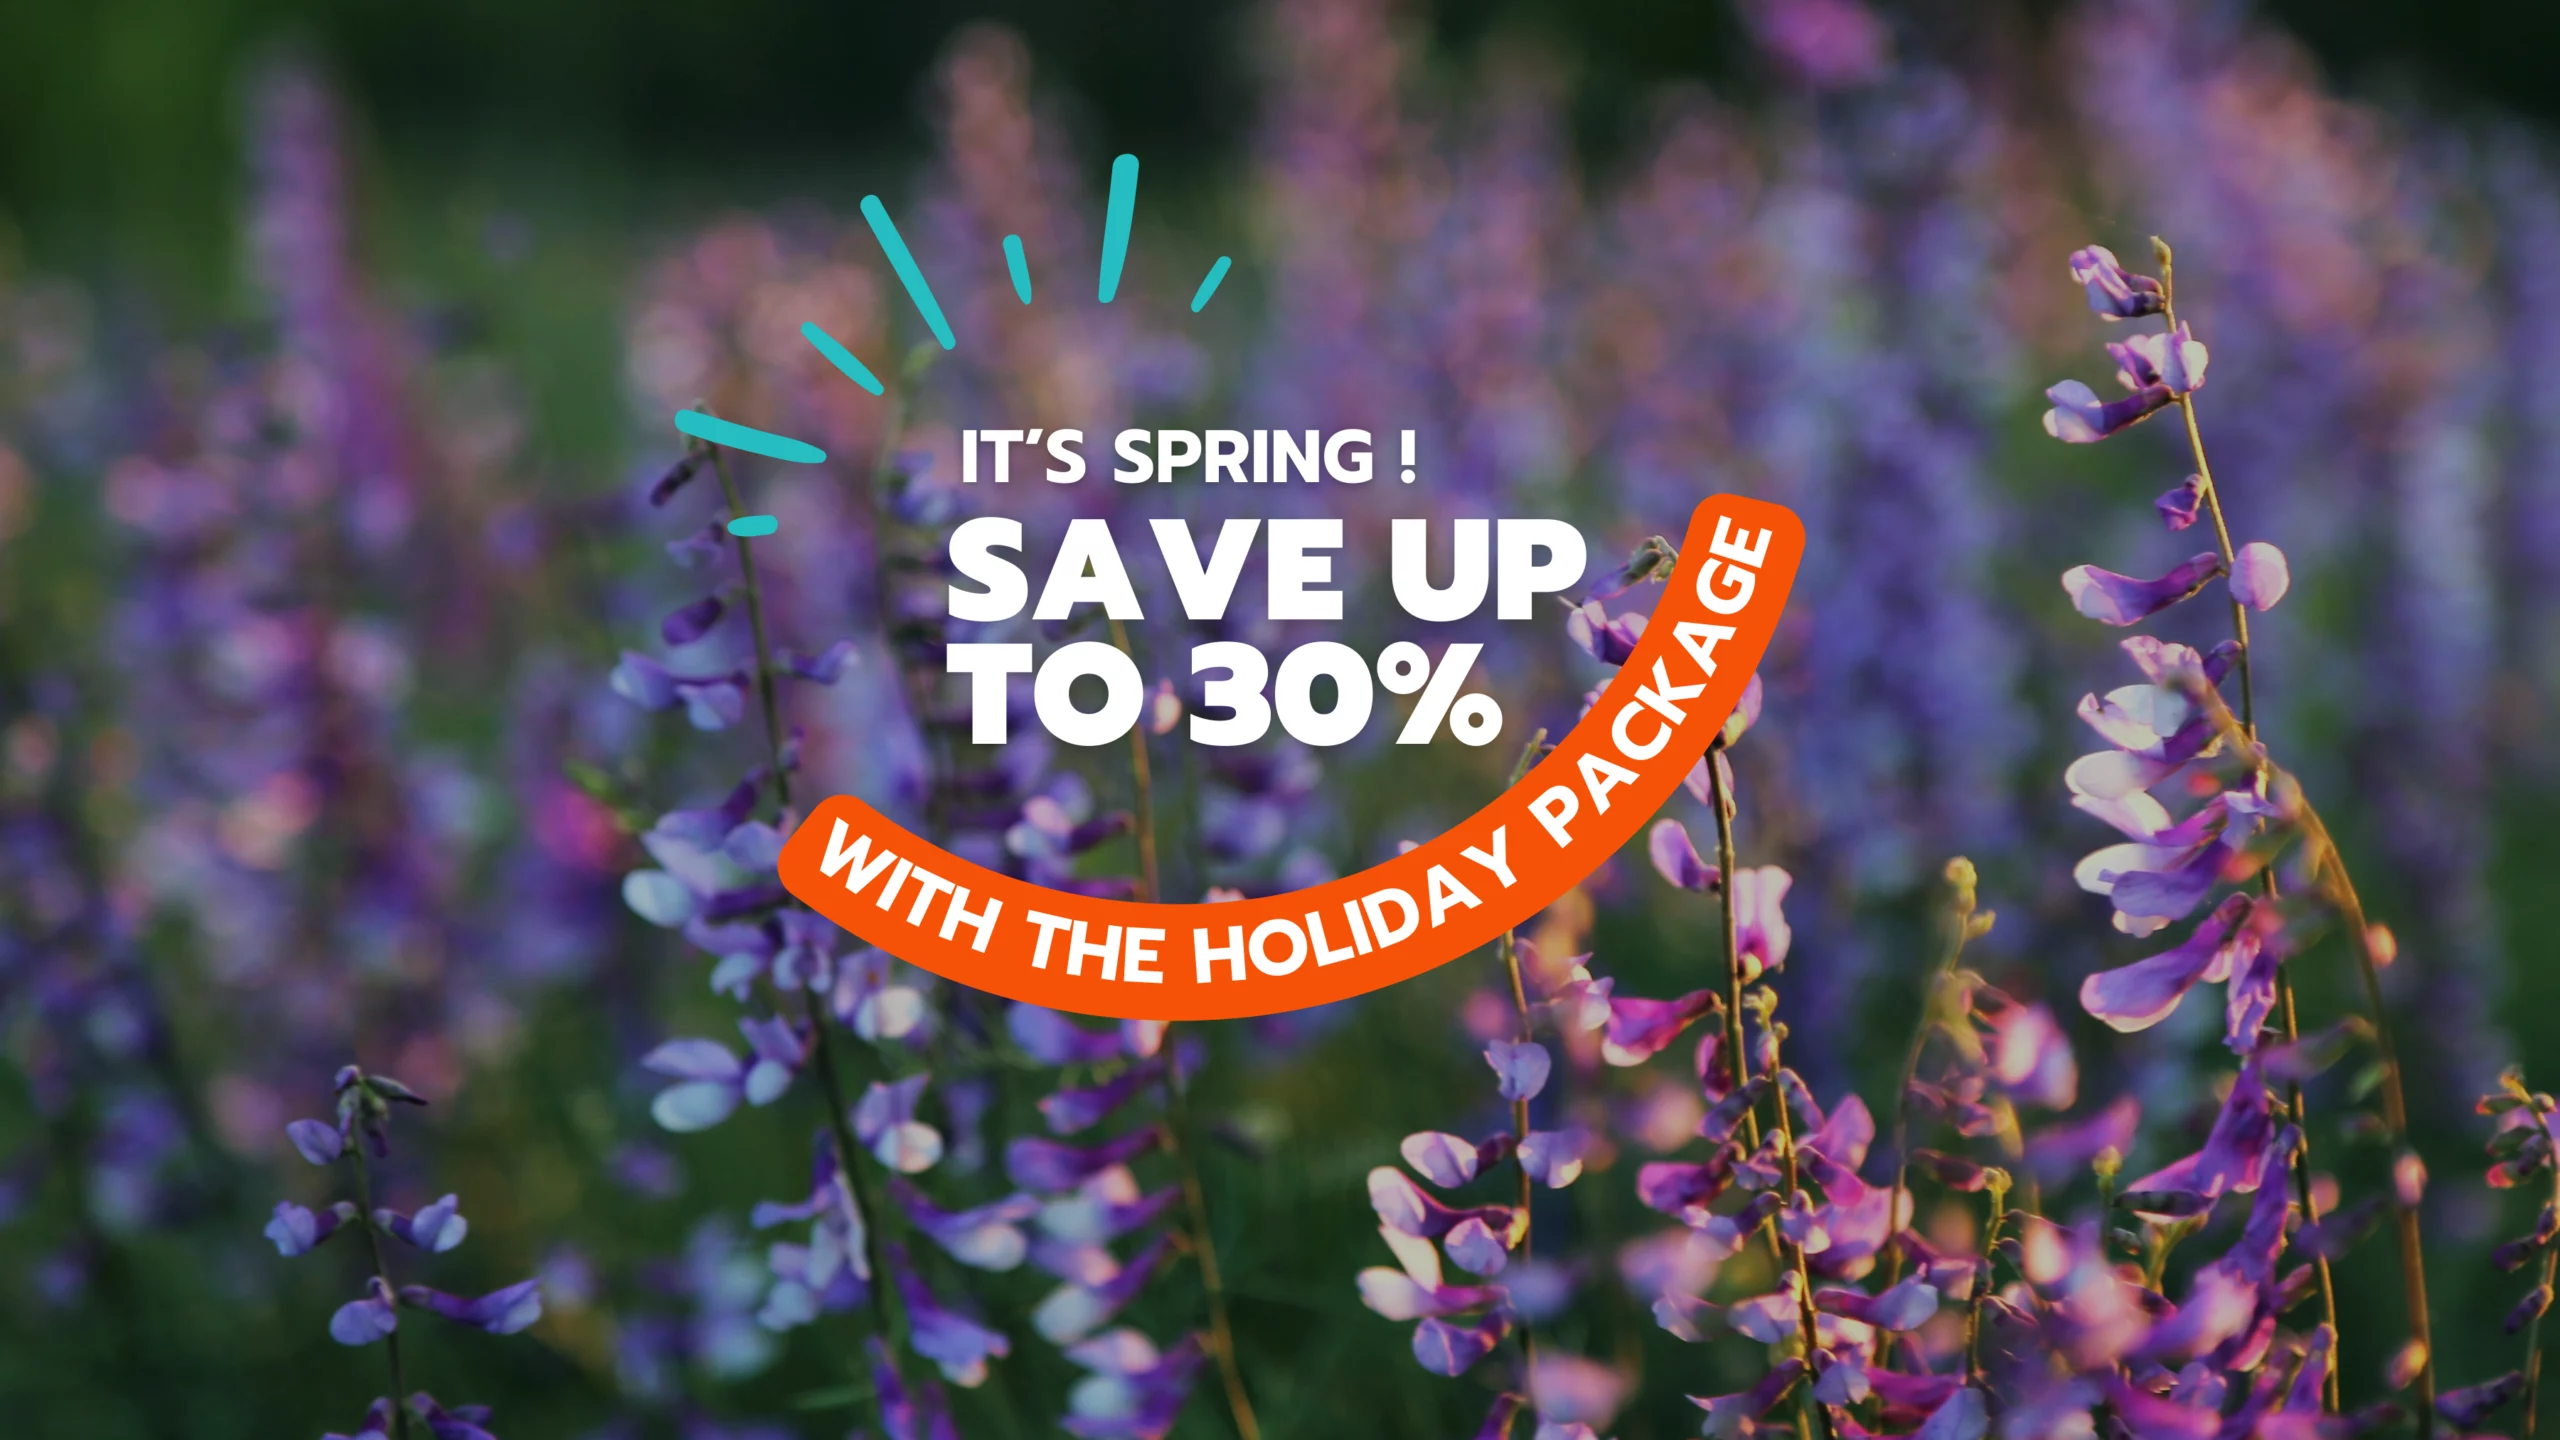 SAVE UP TO 30% ON YOUR BOOKING